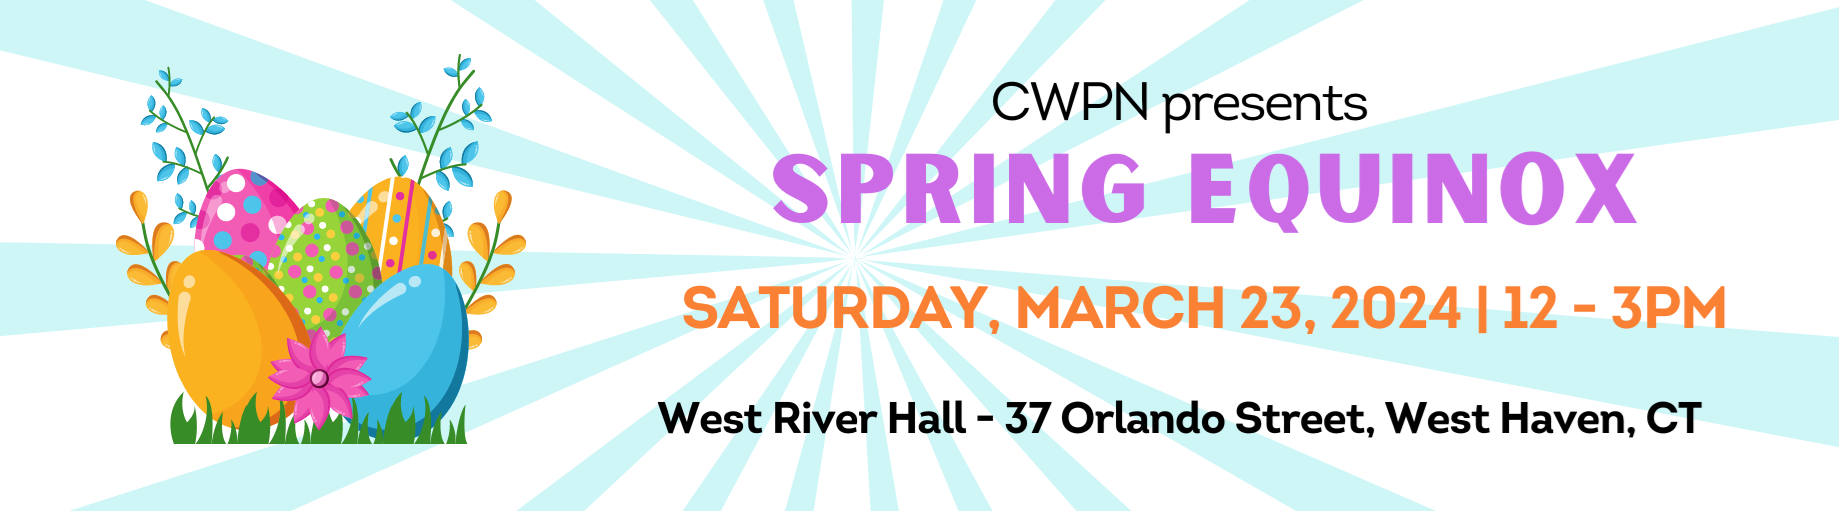 Spring Equinox presented by CWPN